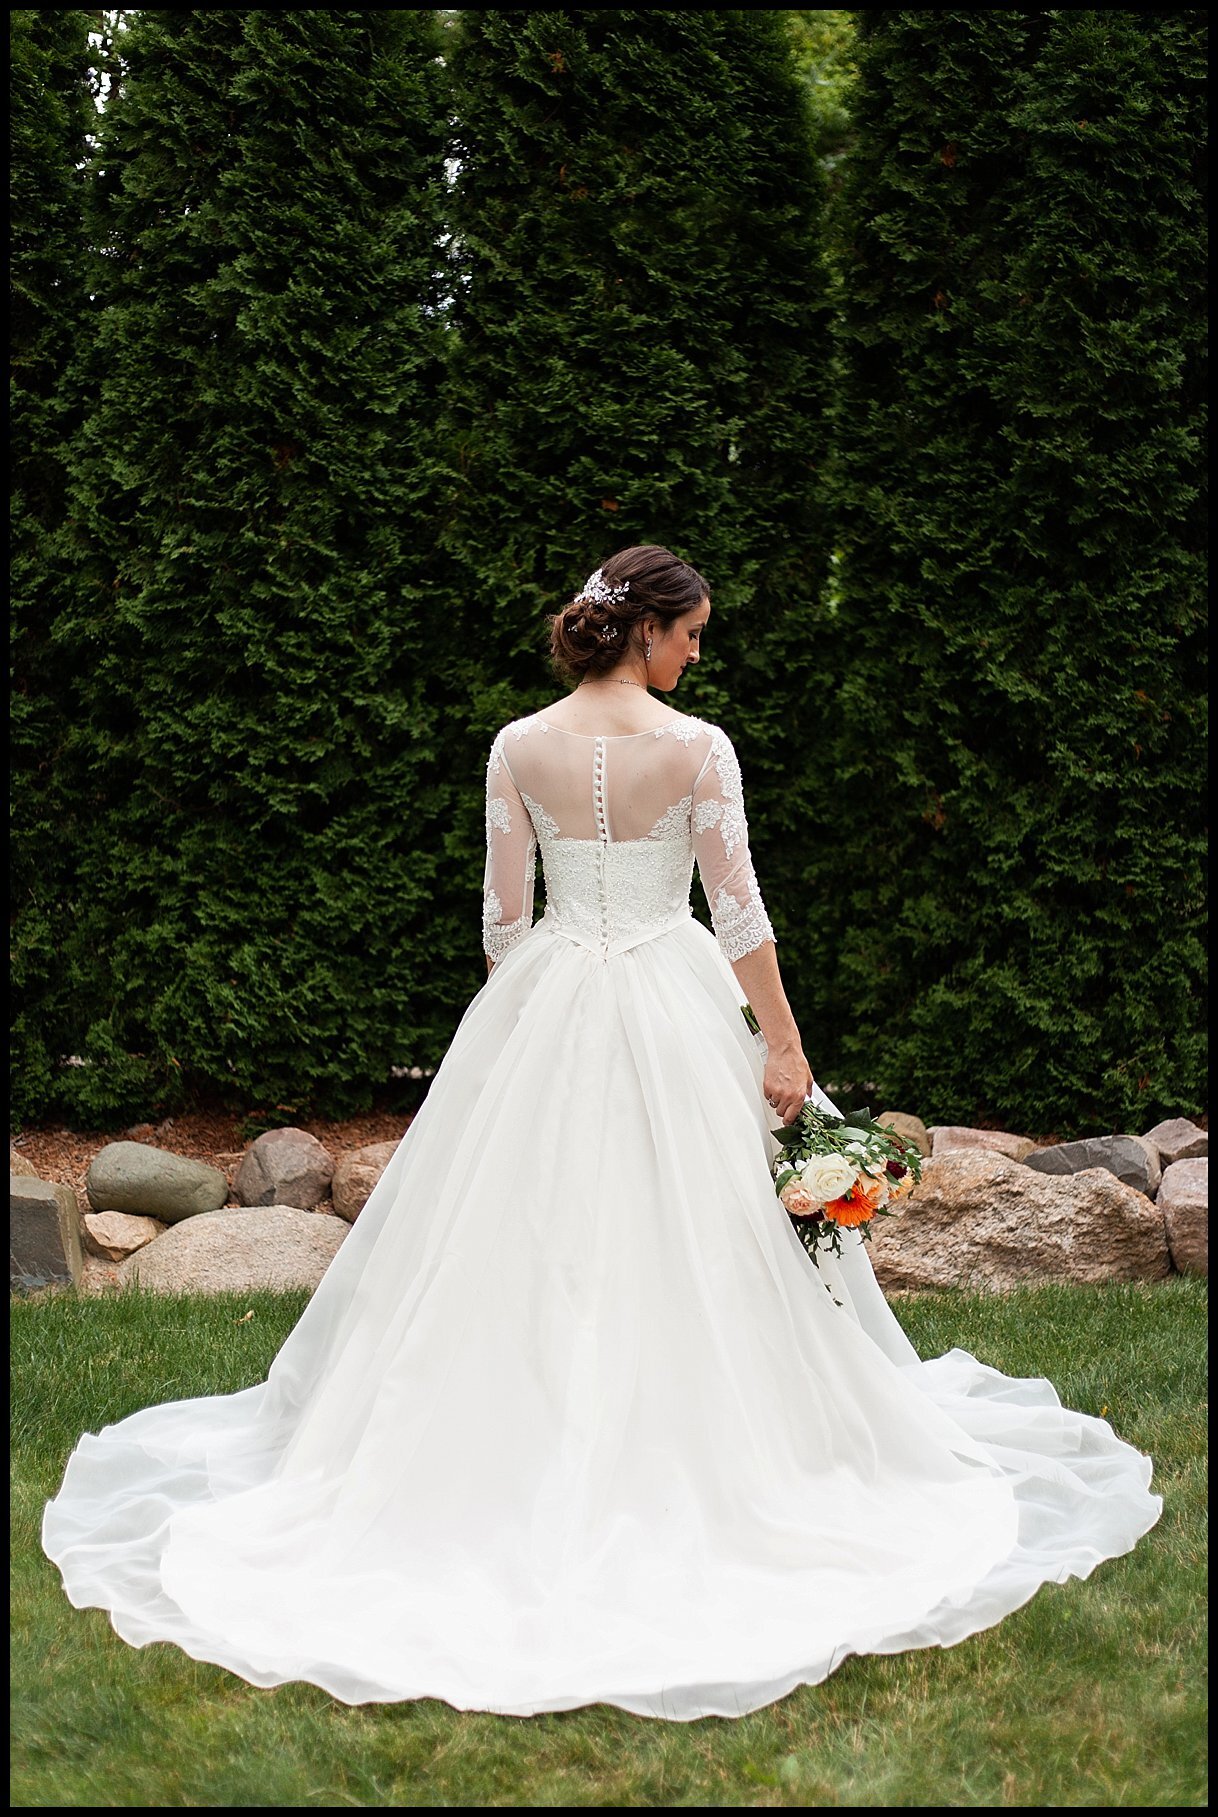 This Michigan bride wears a stunning long-sleeved wedding dress during her backyard wedding ceremony and reception in Farmington Hills, Michigan.